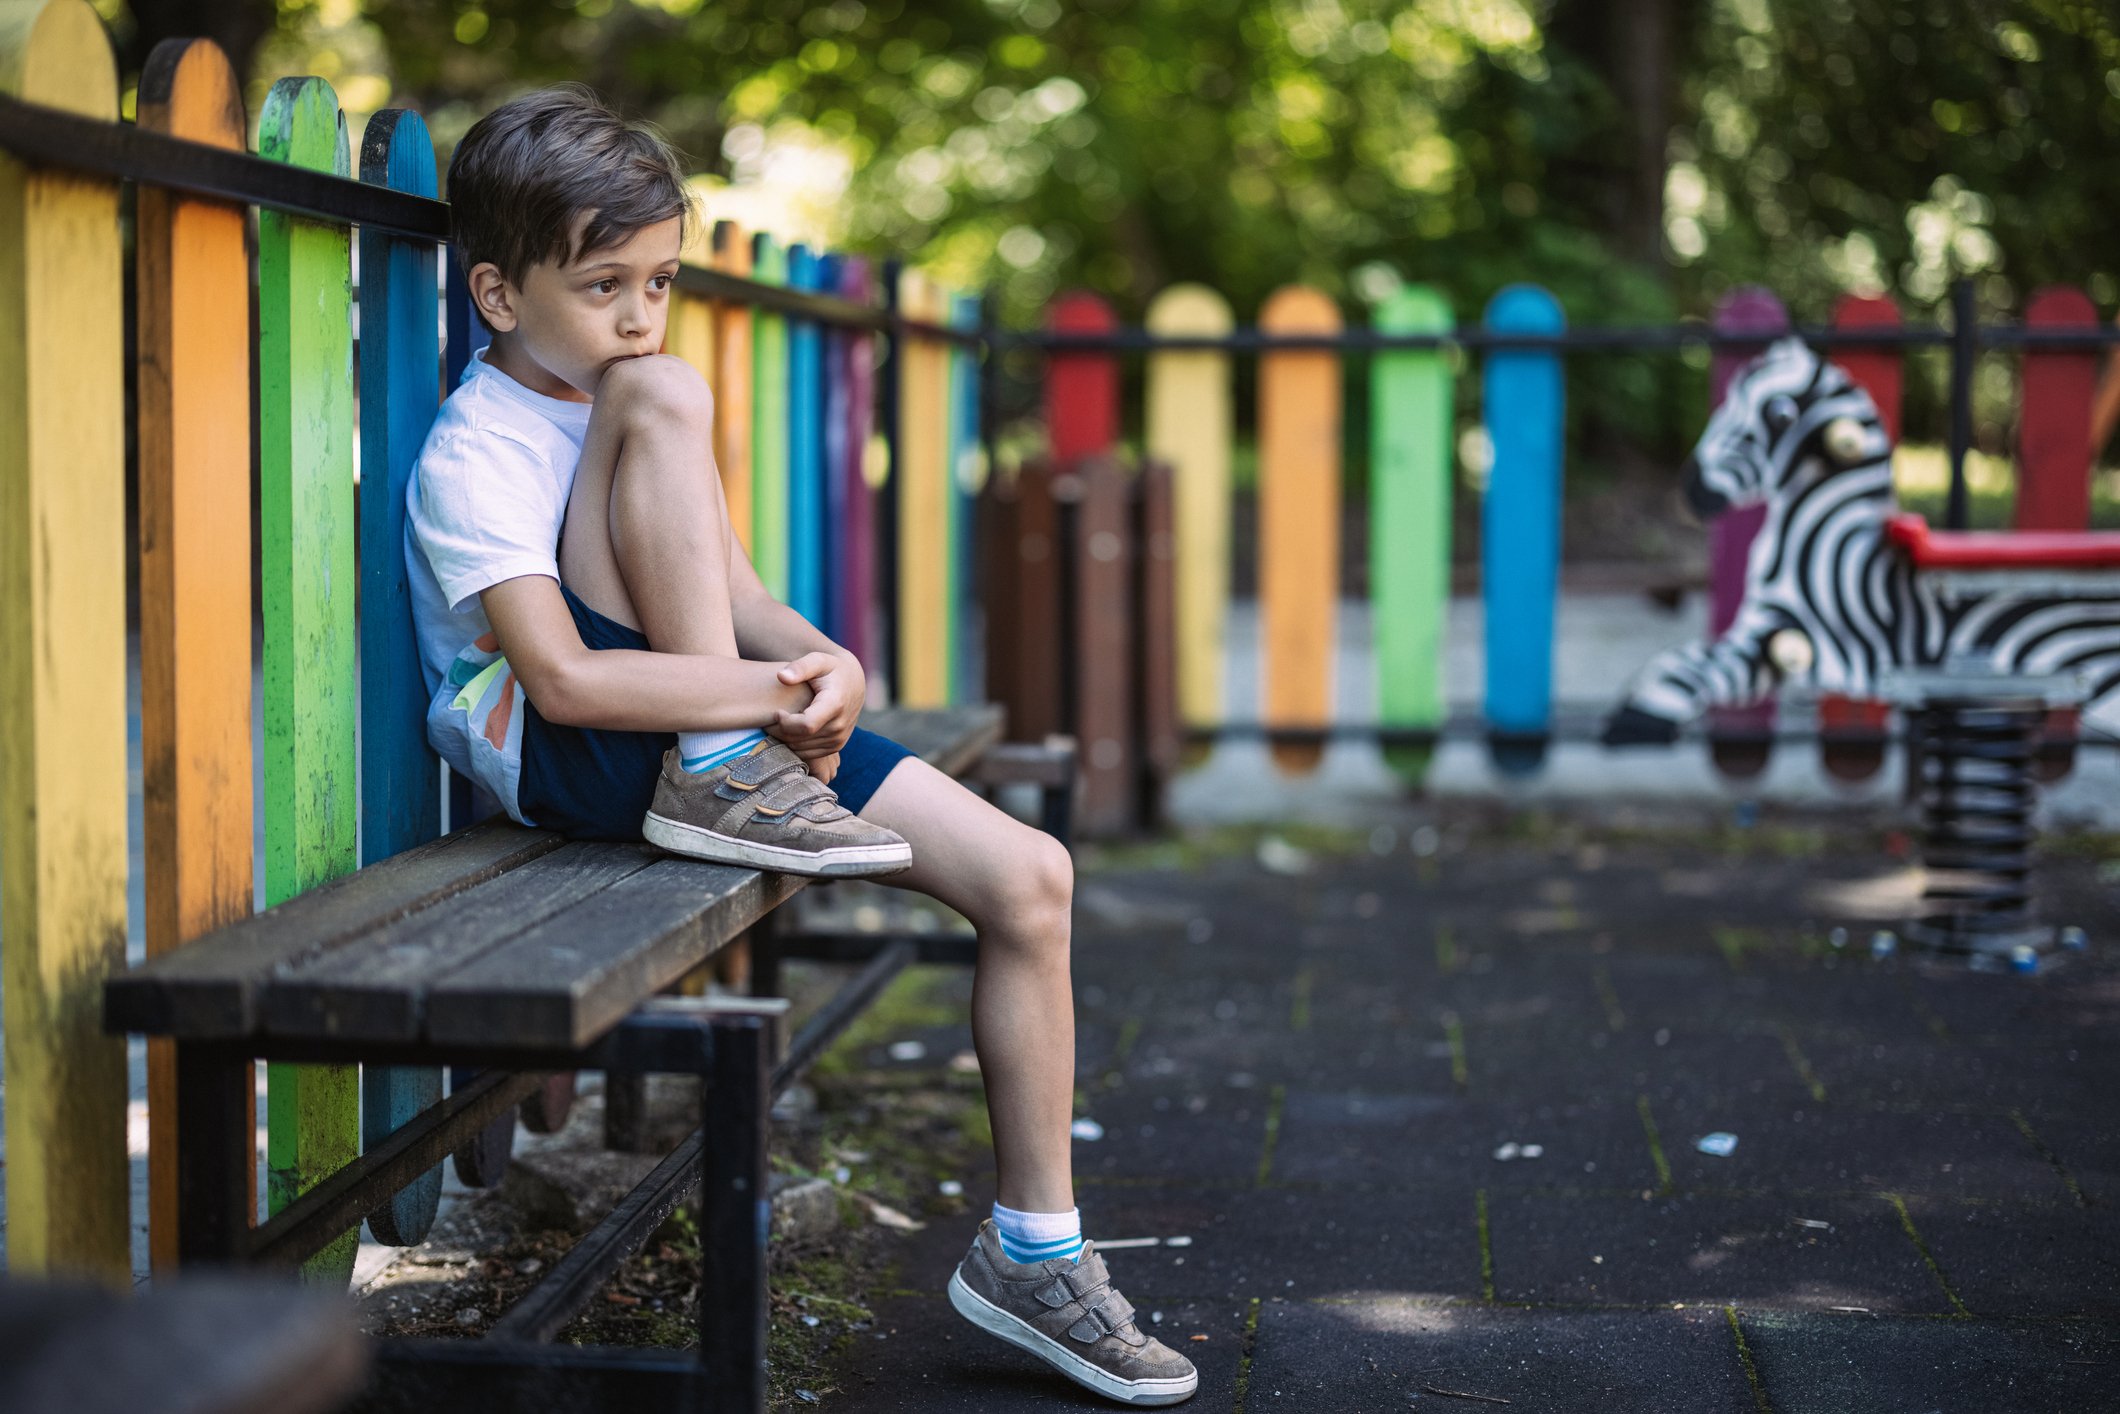 Loneliness epidemic: How to help kids that feel isolated